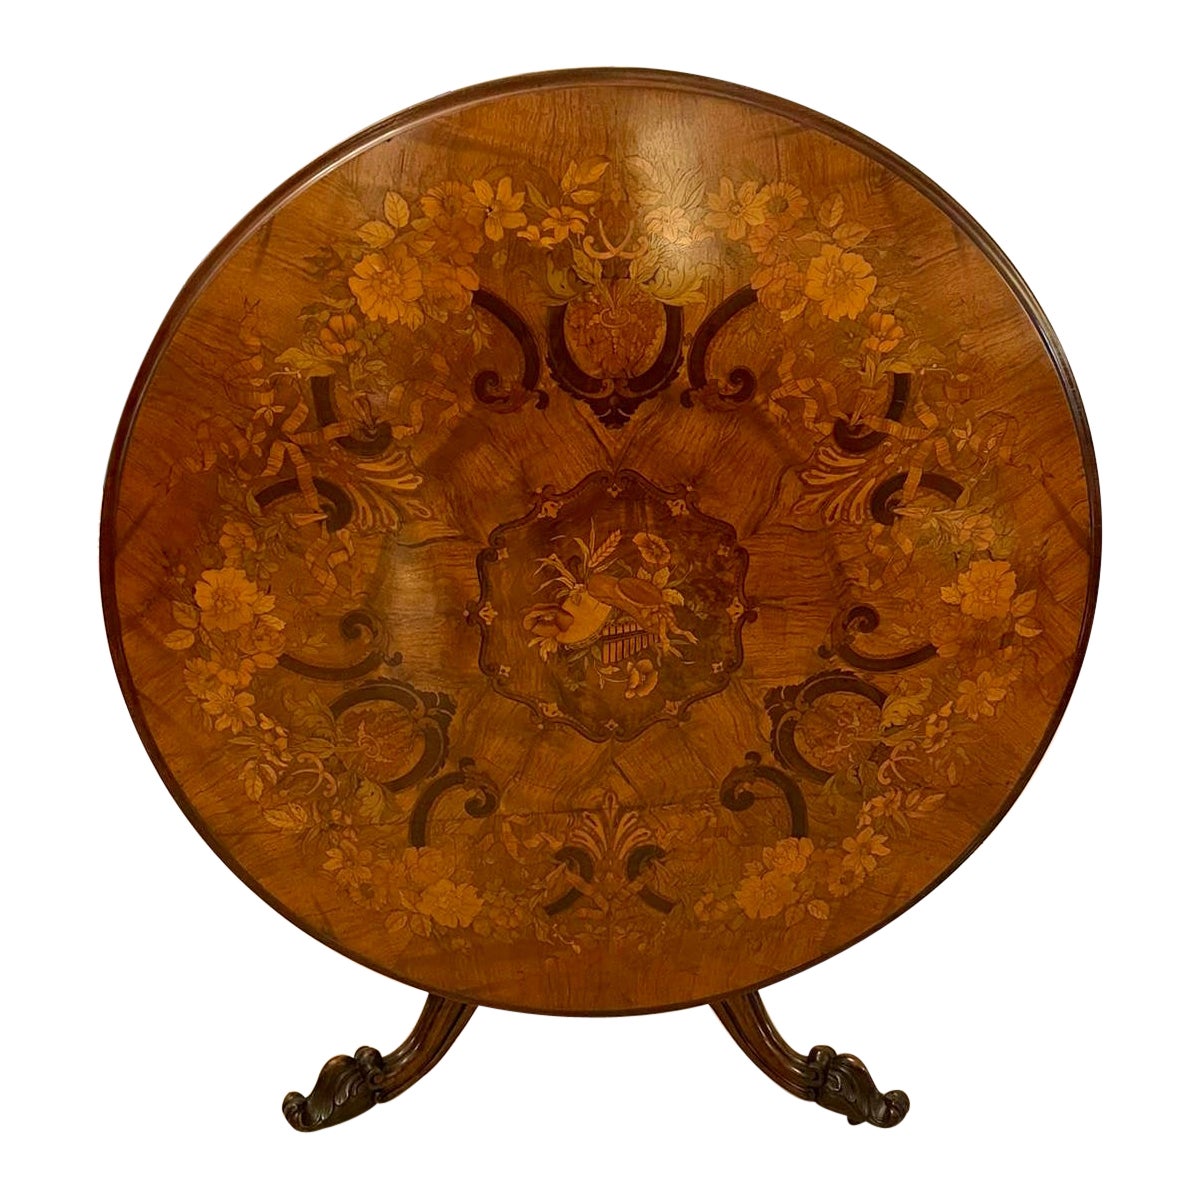 Outstanding Quality Antique Burr Walnut Marquetry Inlaid Centre/Dining Table